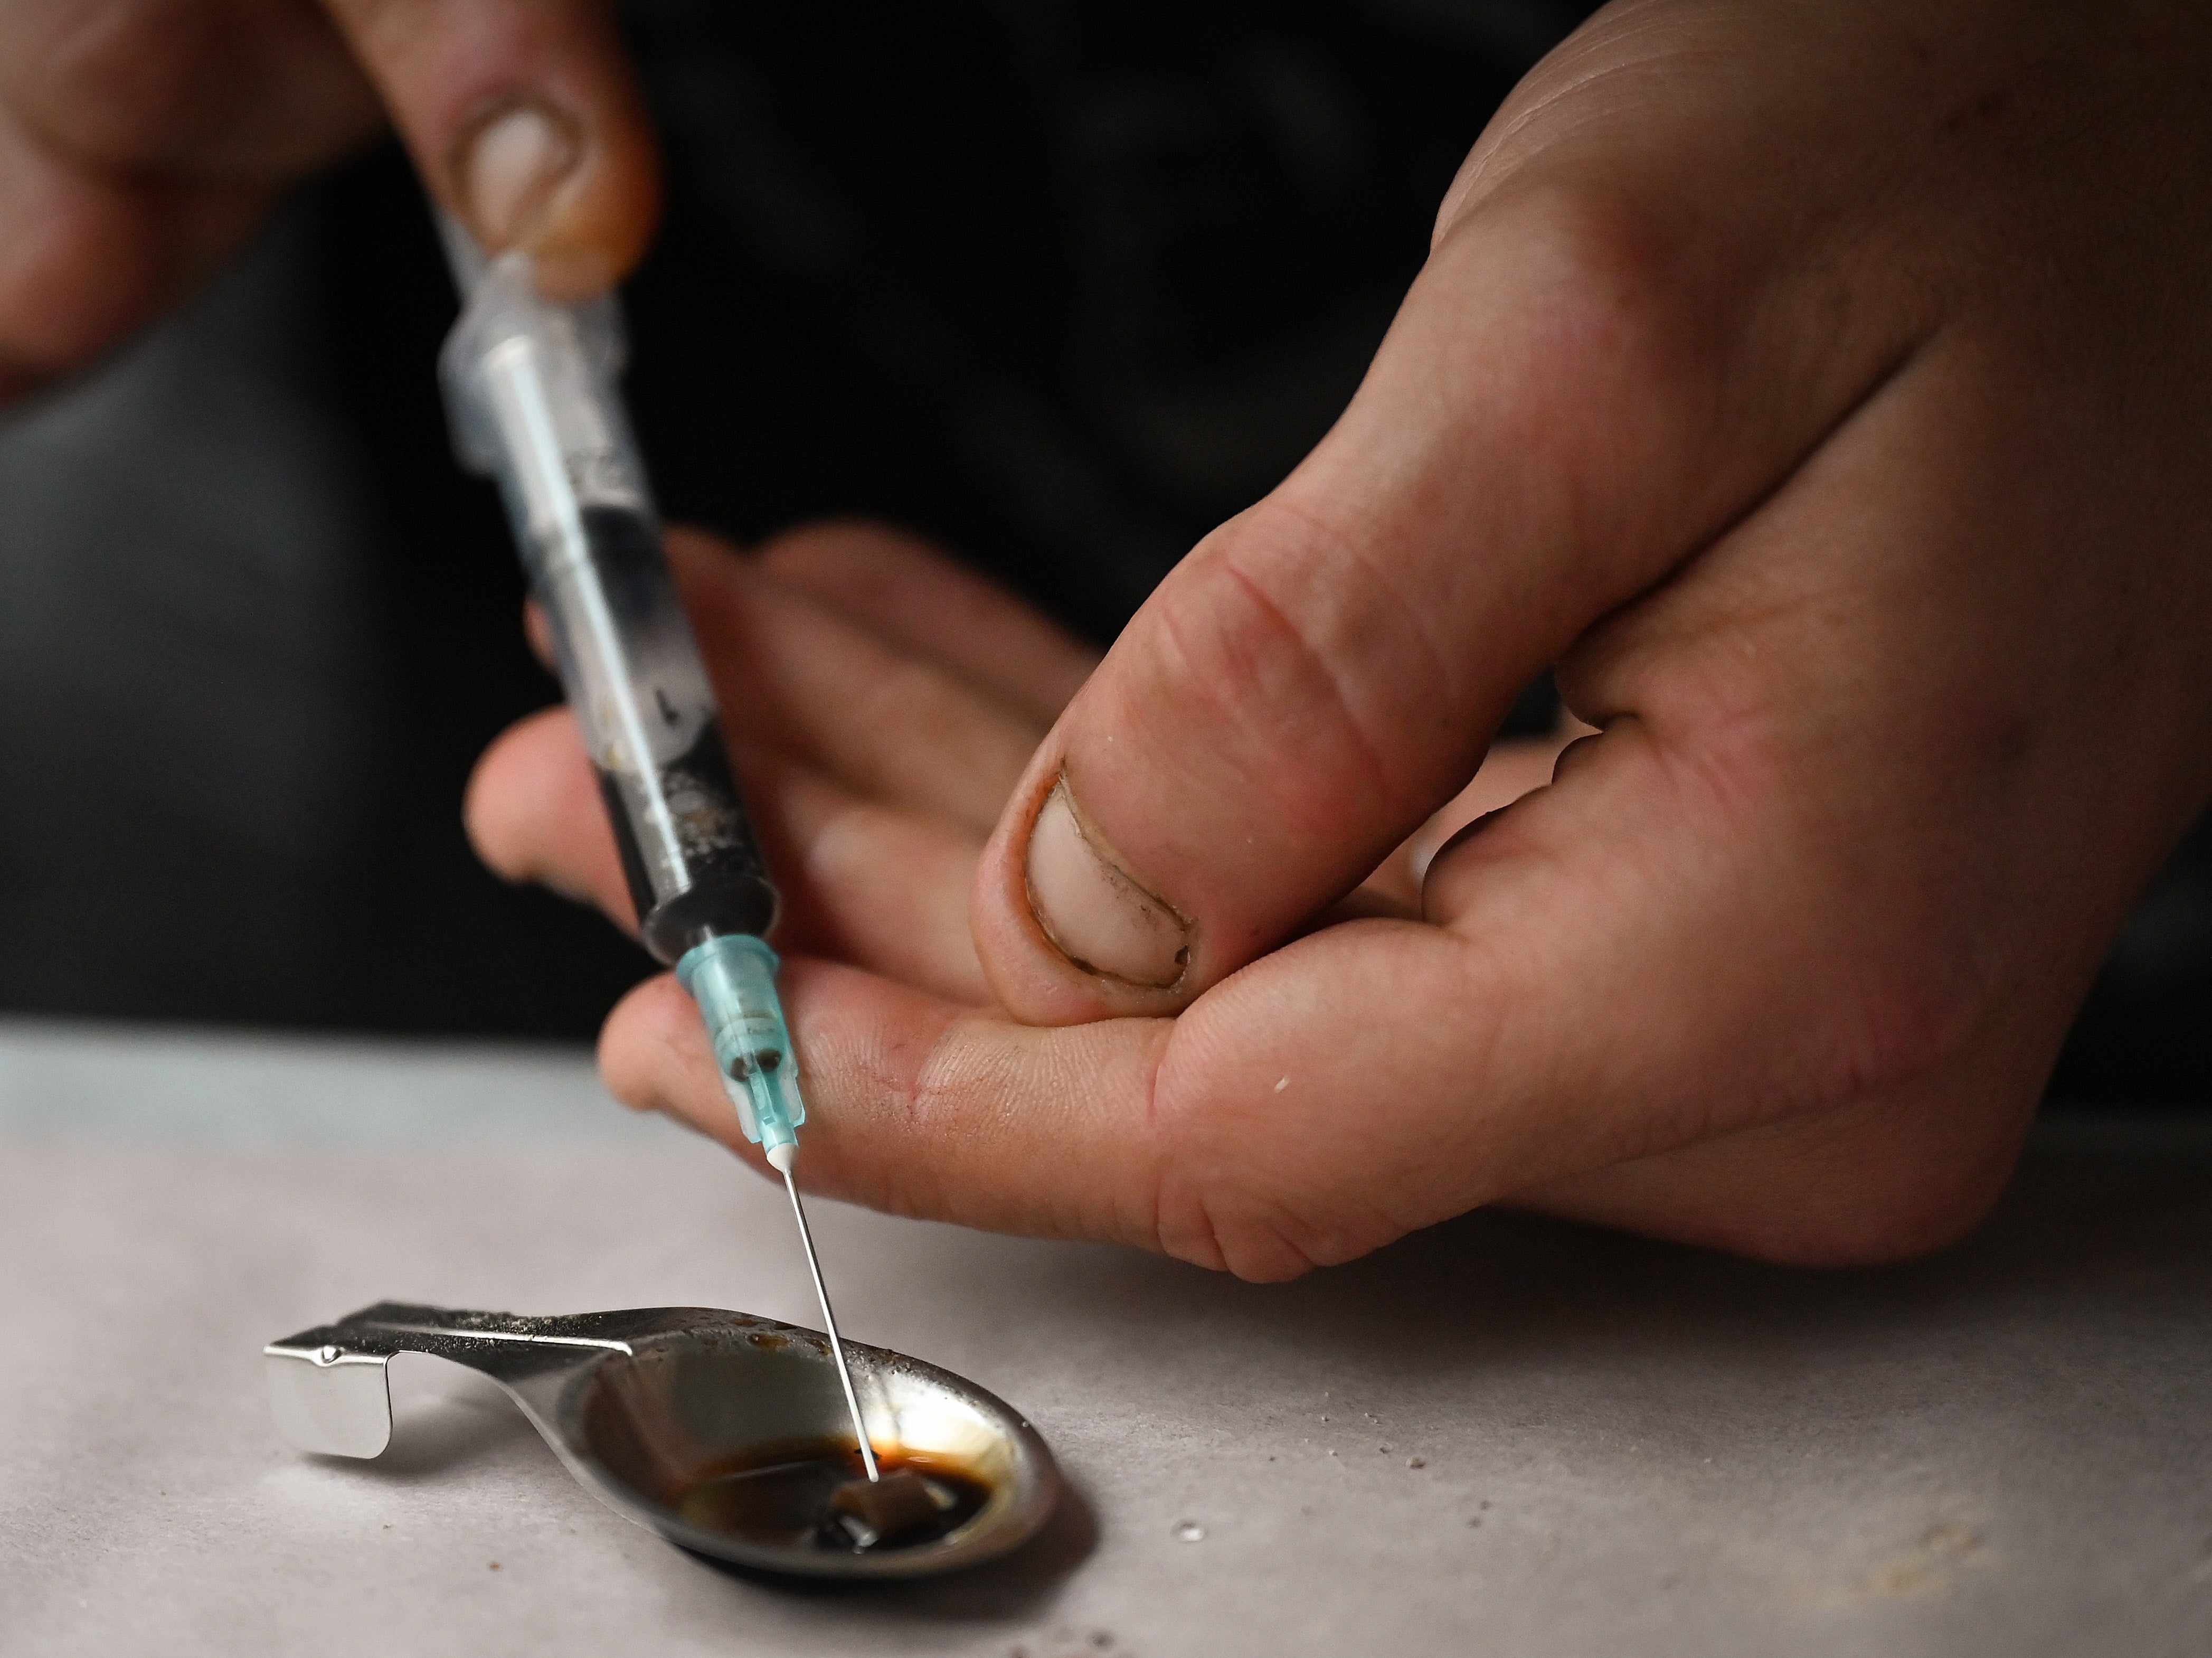 Drug users prepare heroin before injecting, while inside a safe consumption van